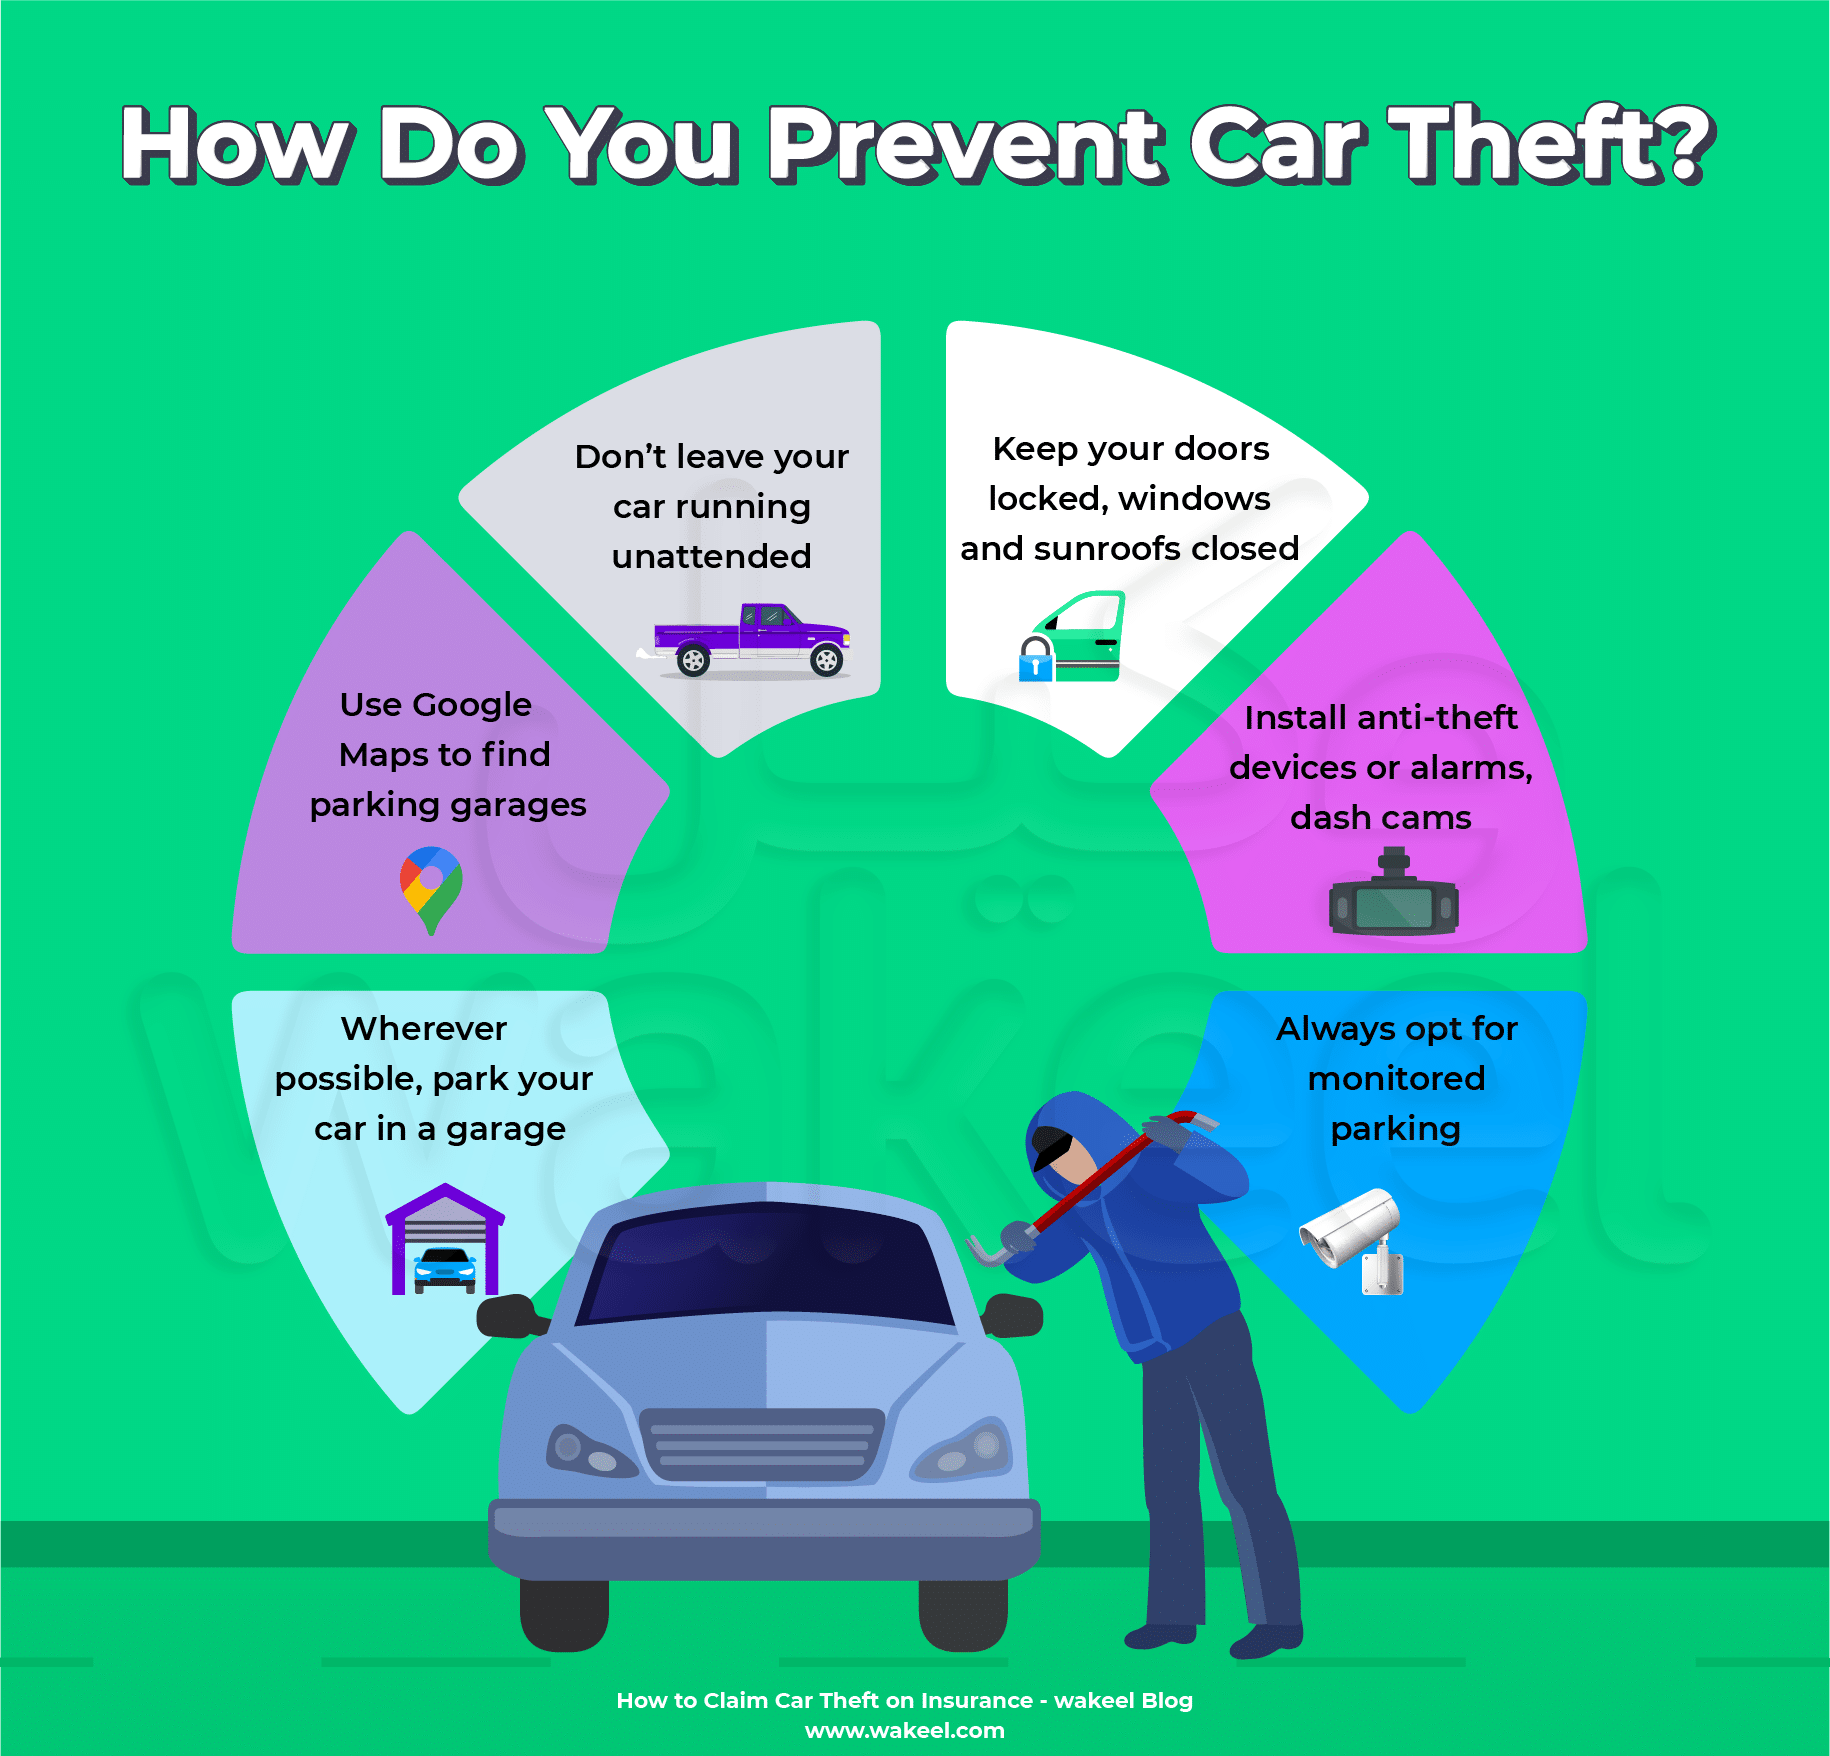 Infographic illustrating tips to prevent car theft in Saudi Arabia, including secure parking, alarm systems, and theft deterrents.